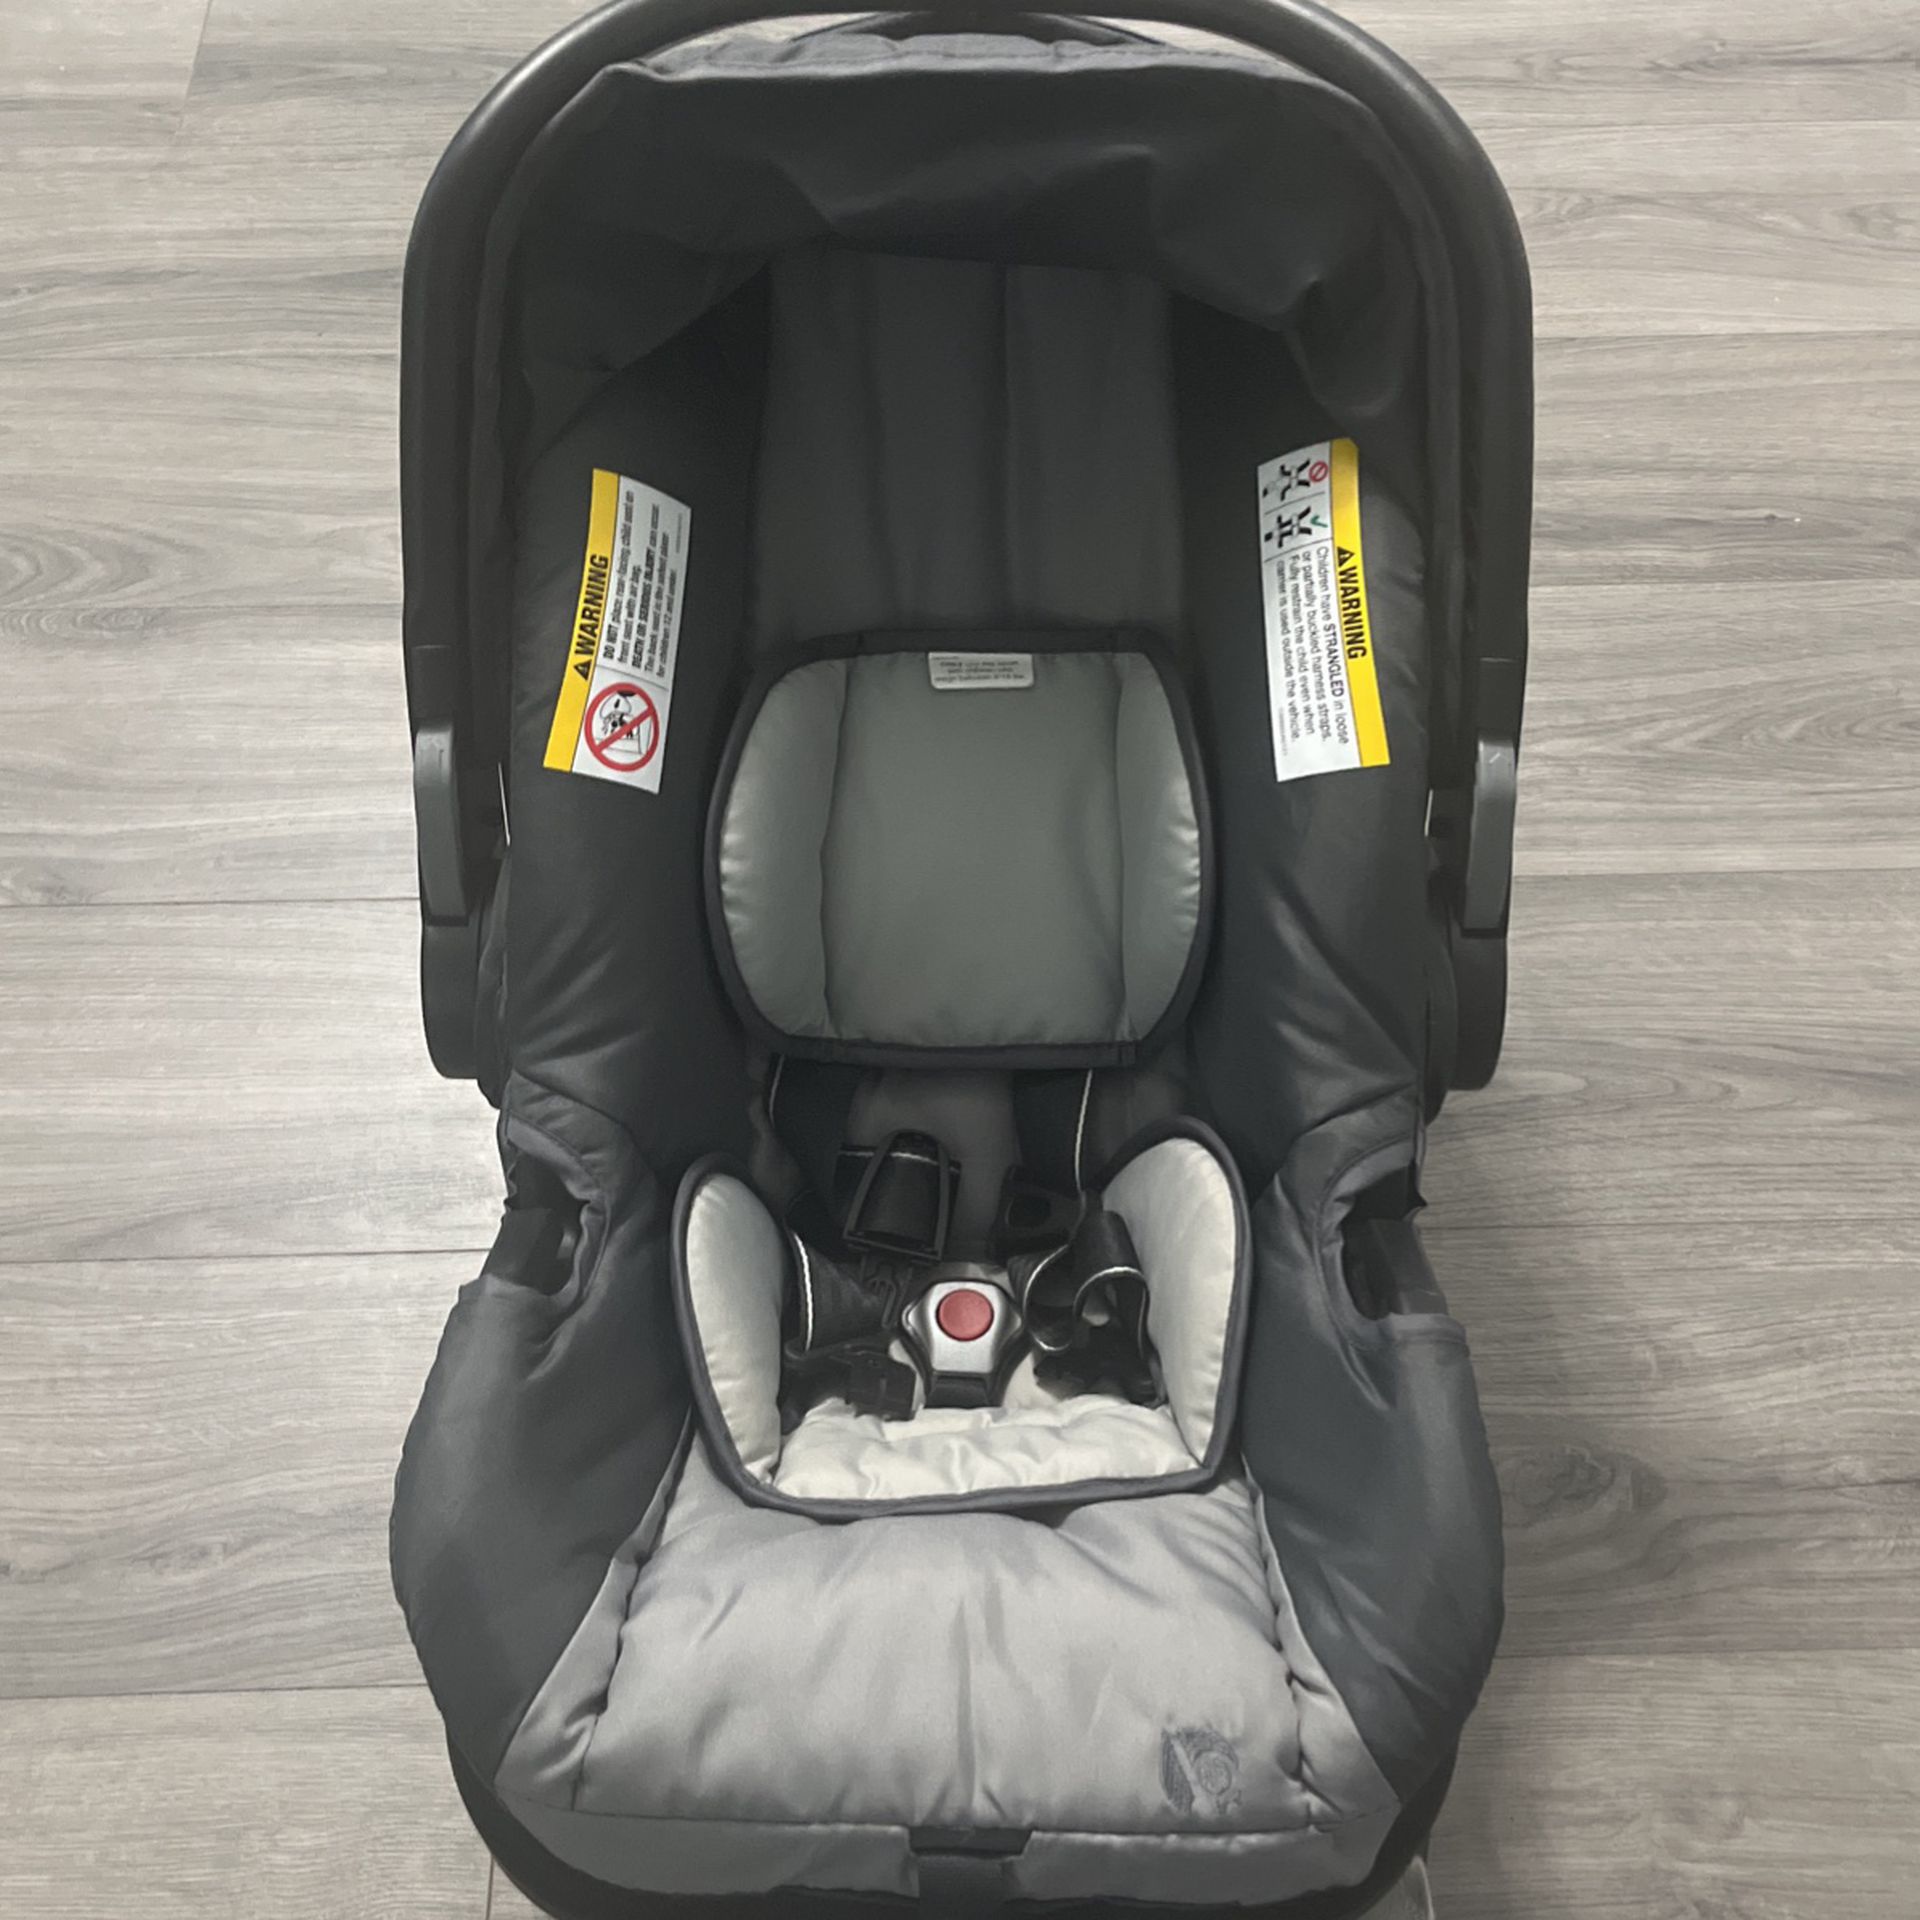 BABY Trend Car Seat